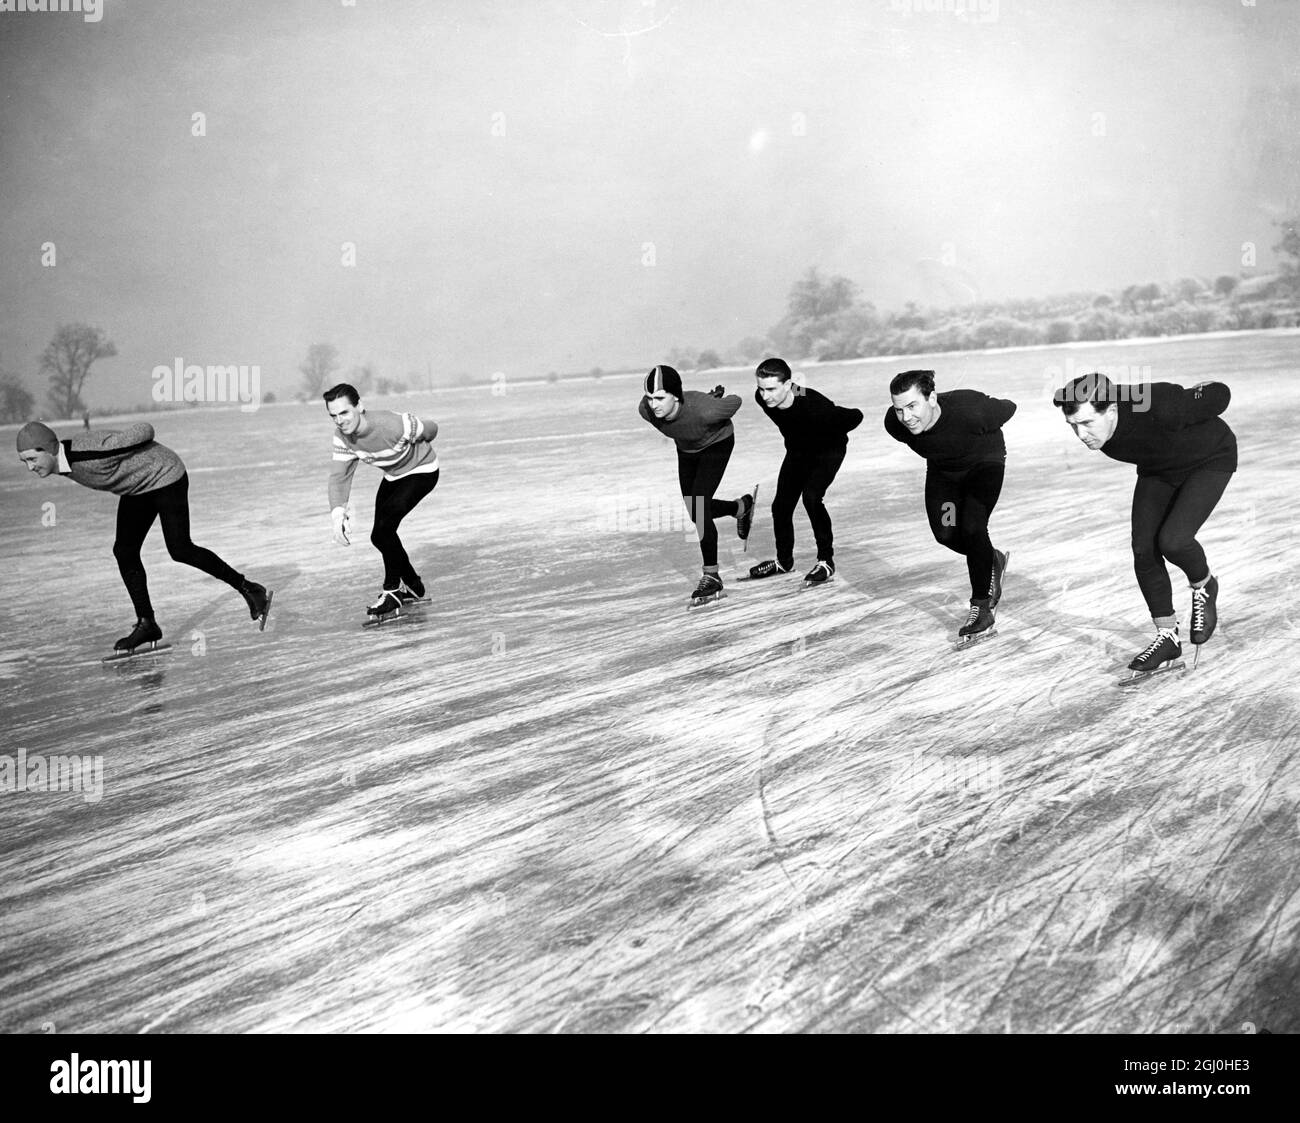 National Skating Association's Professional Speed Skating Championships of Great Britain, in Swavesey, in der Nähe von Cambridge, England. L-R: A. Whittle (Poole) der Gewinner; J. Simpson (London); G.T. Ward (Gorefield, Wisbech); L.F. Smith (Whittlesea, Peterborough); N. Young (Wisbech); P.T. Doppeltag (Outwall, Wisbech). 16. Januar 1959 Stockfoto